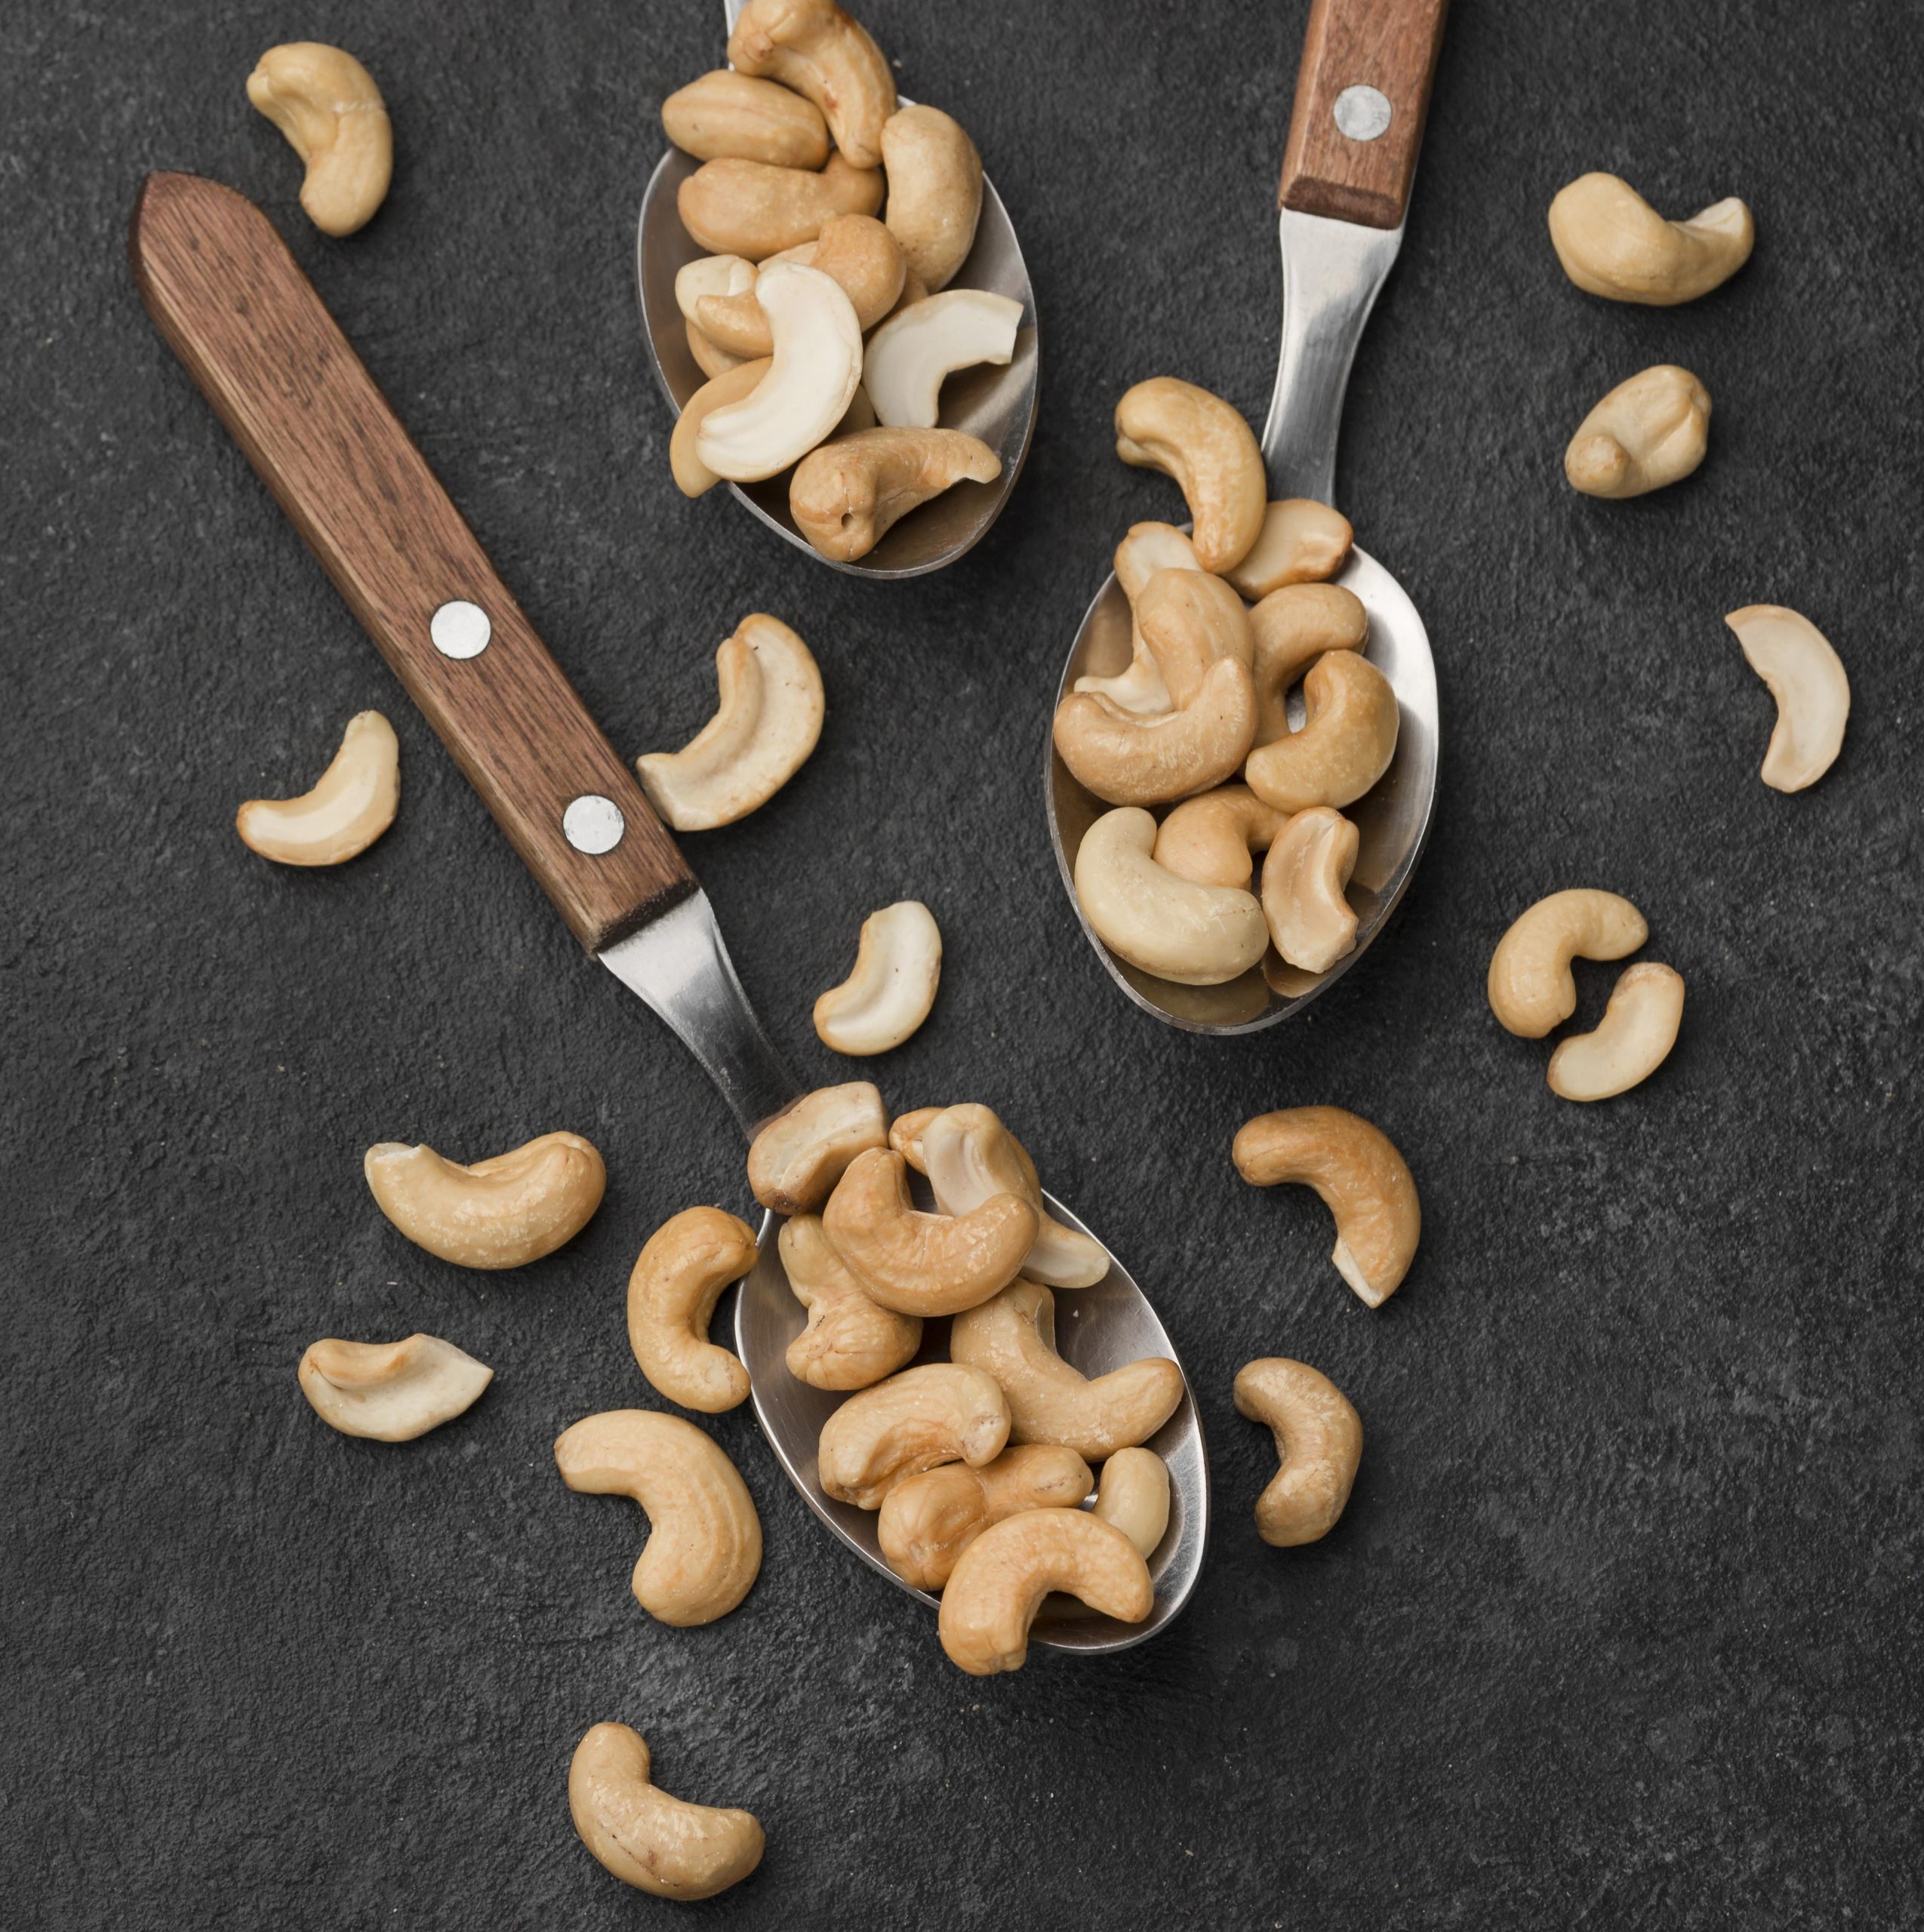 Organic Cashew Nuts and Nutrition for Children - A Safe and Nutrient-Rich Choice